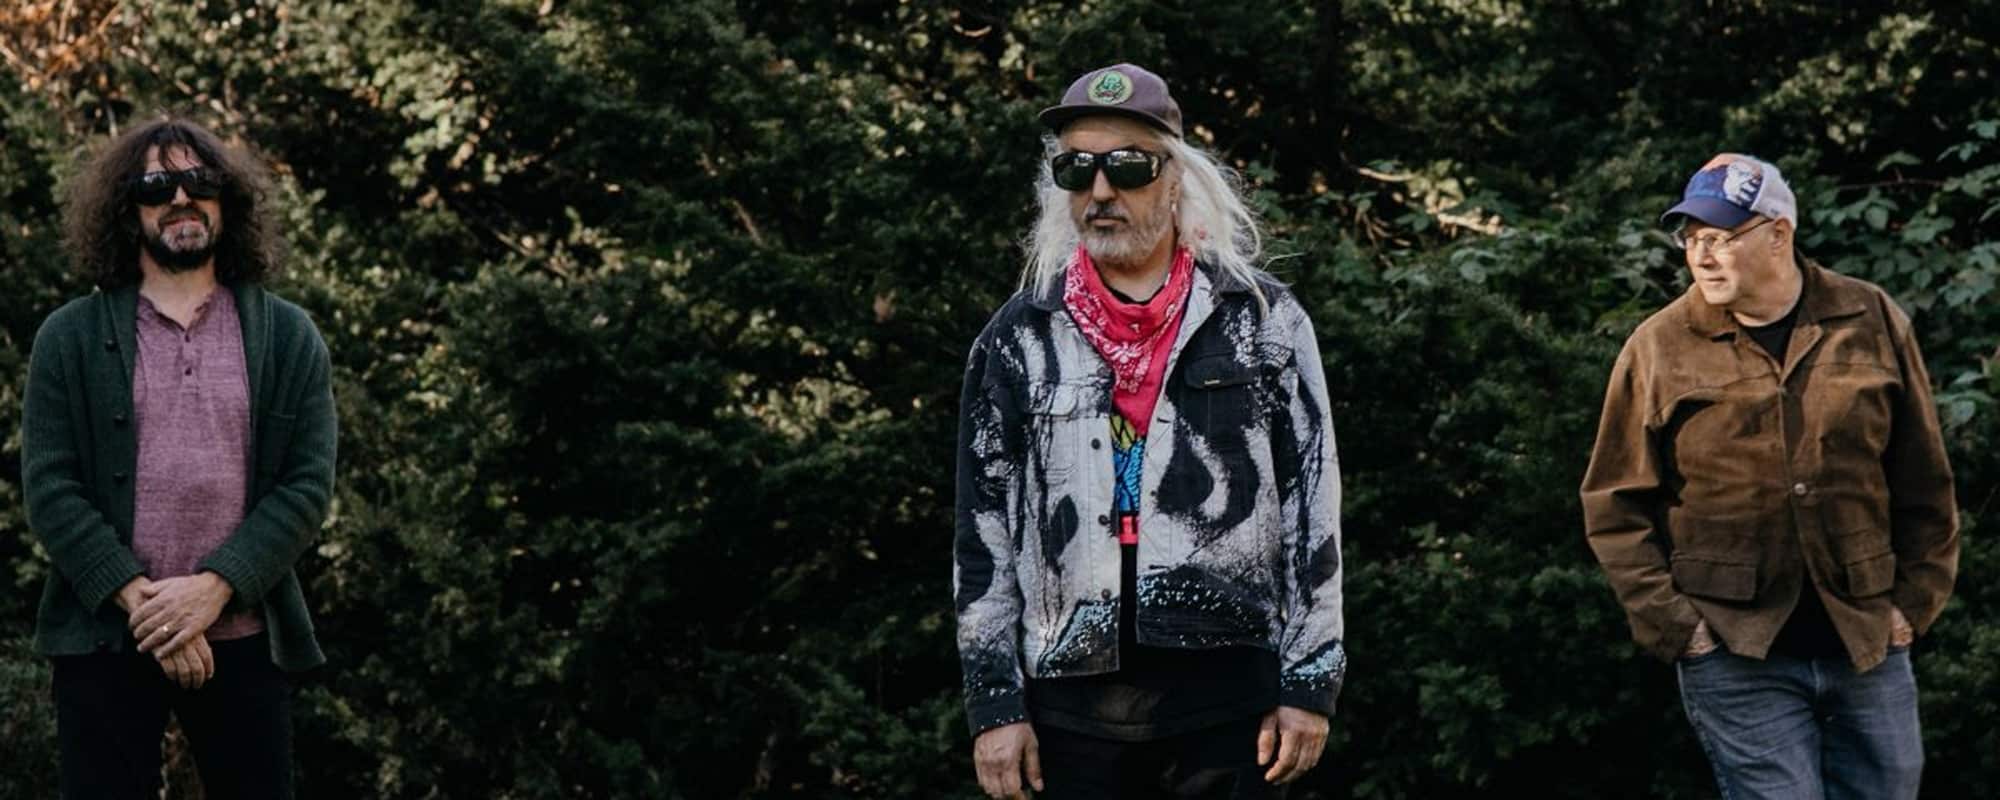 Dinosaur Jr. Return with New Album, ‘Sweep It Into Space’